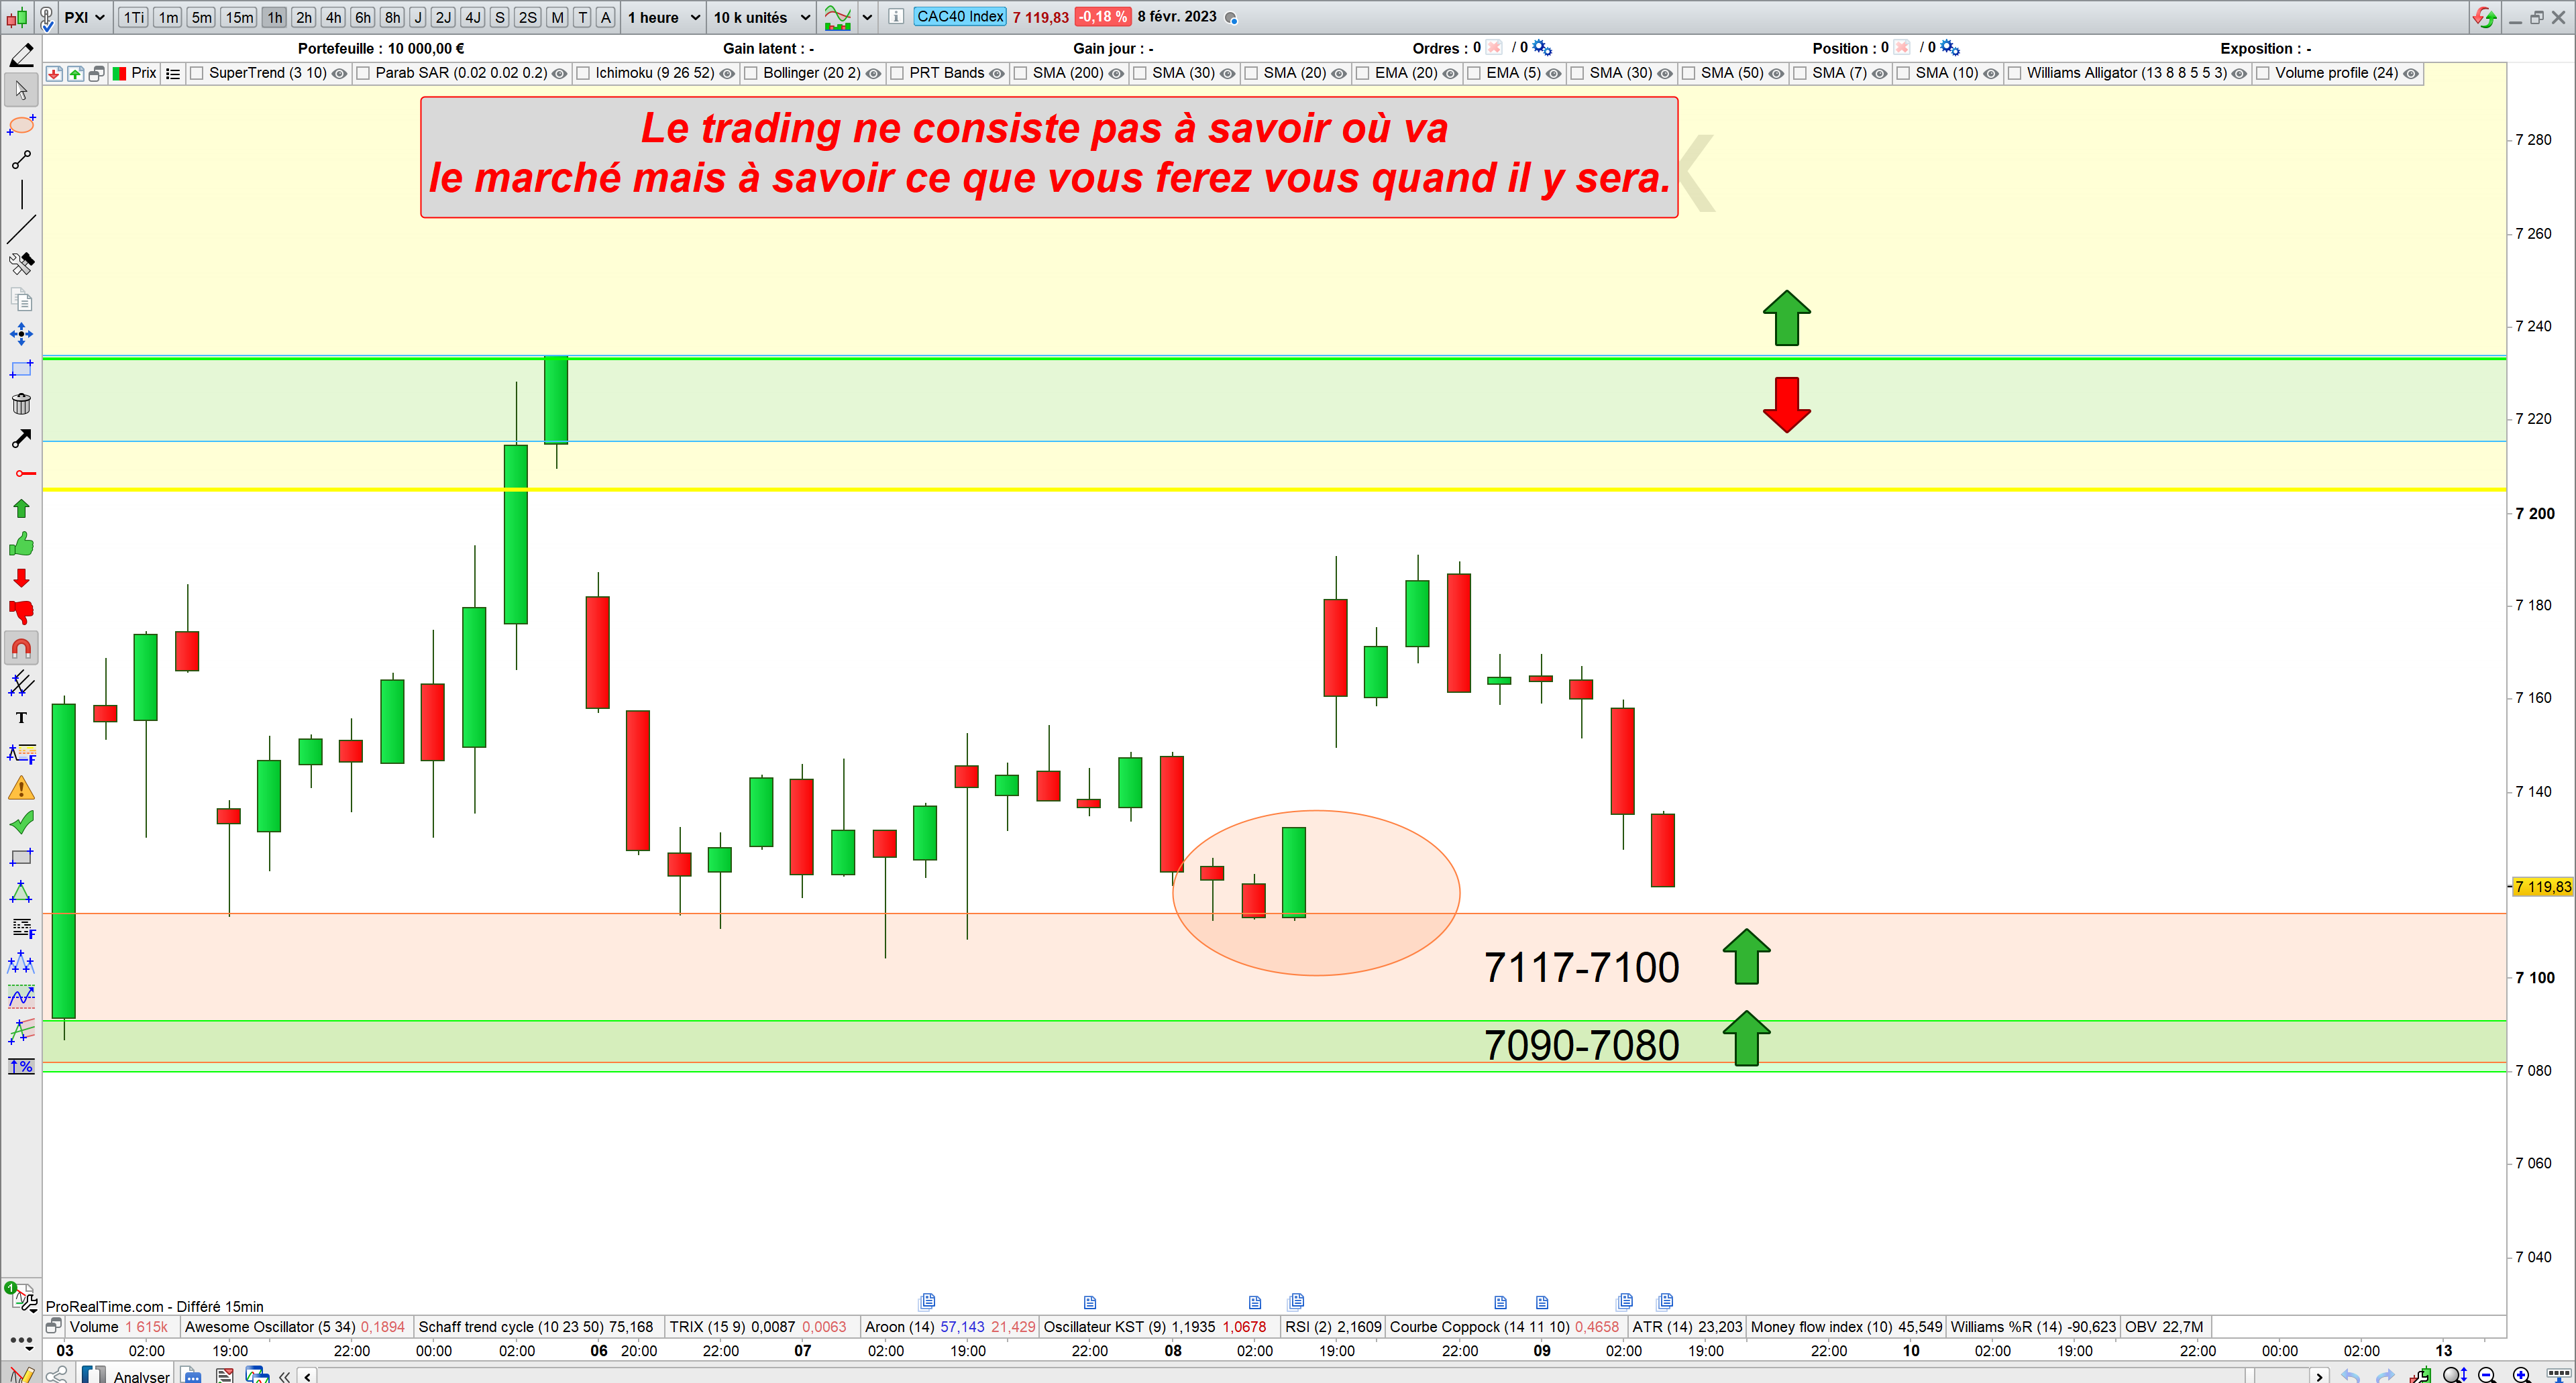 Trading cac40 08/02/23